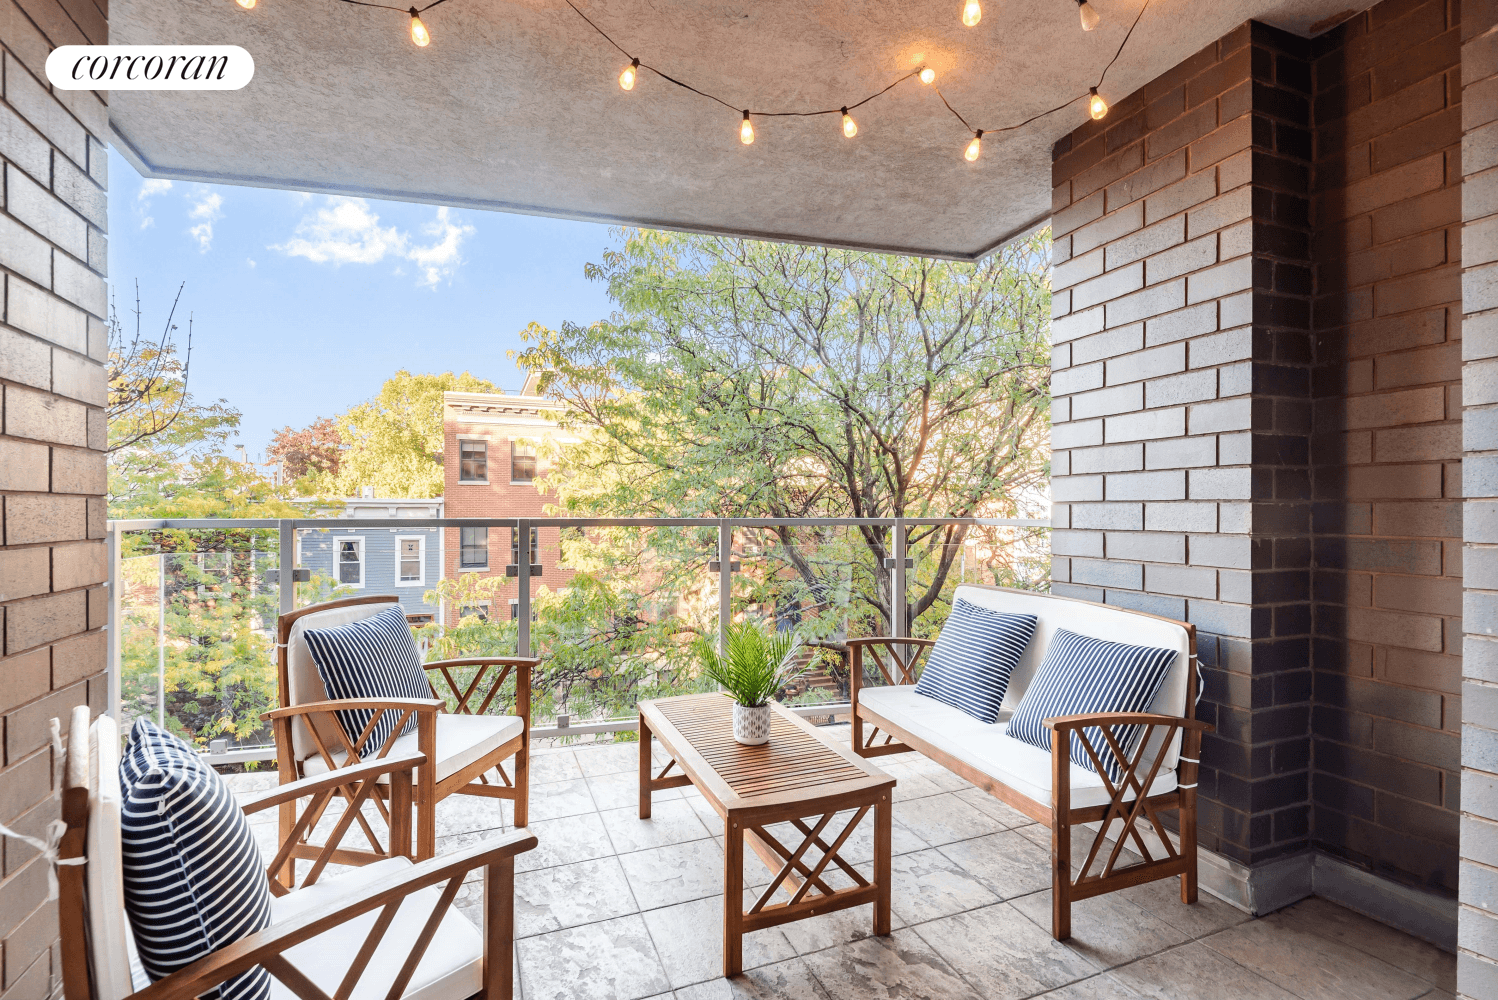 Two Beds amp ; Two Baths 2 terraces290 13th St 3 is a sprawling condo just shy of 1, 200 sq ft and with two extra large balconies, you'll have ...